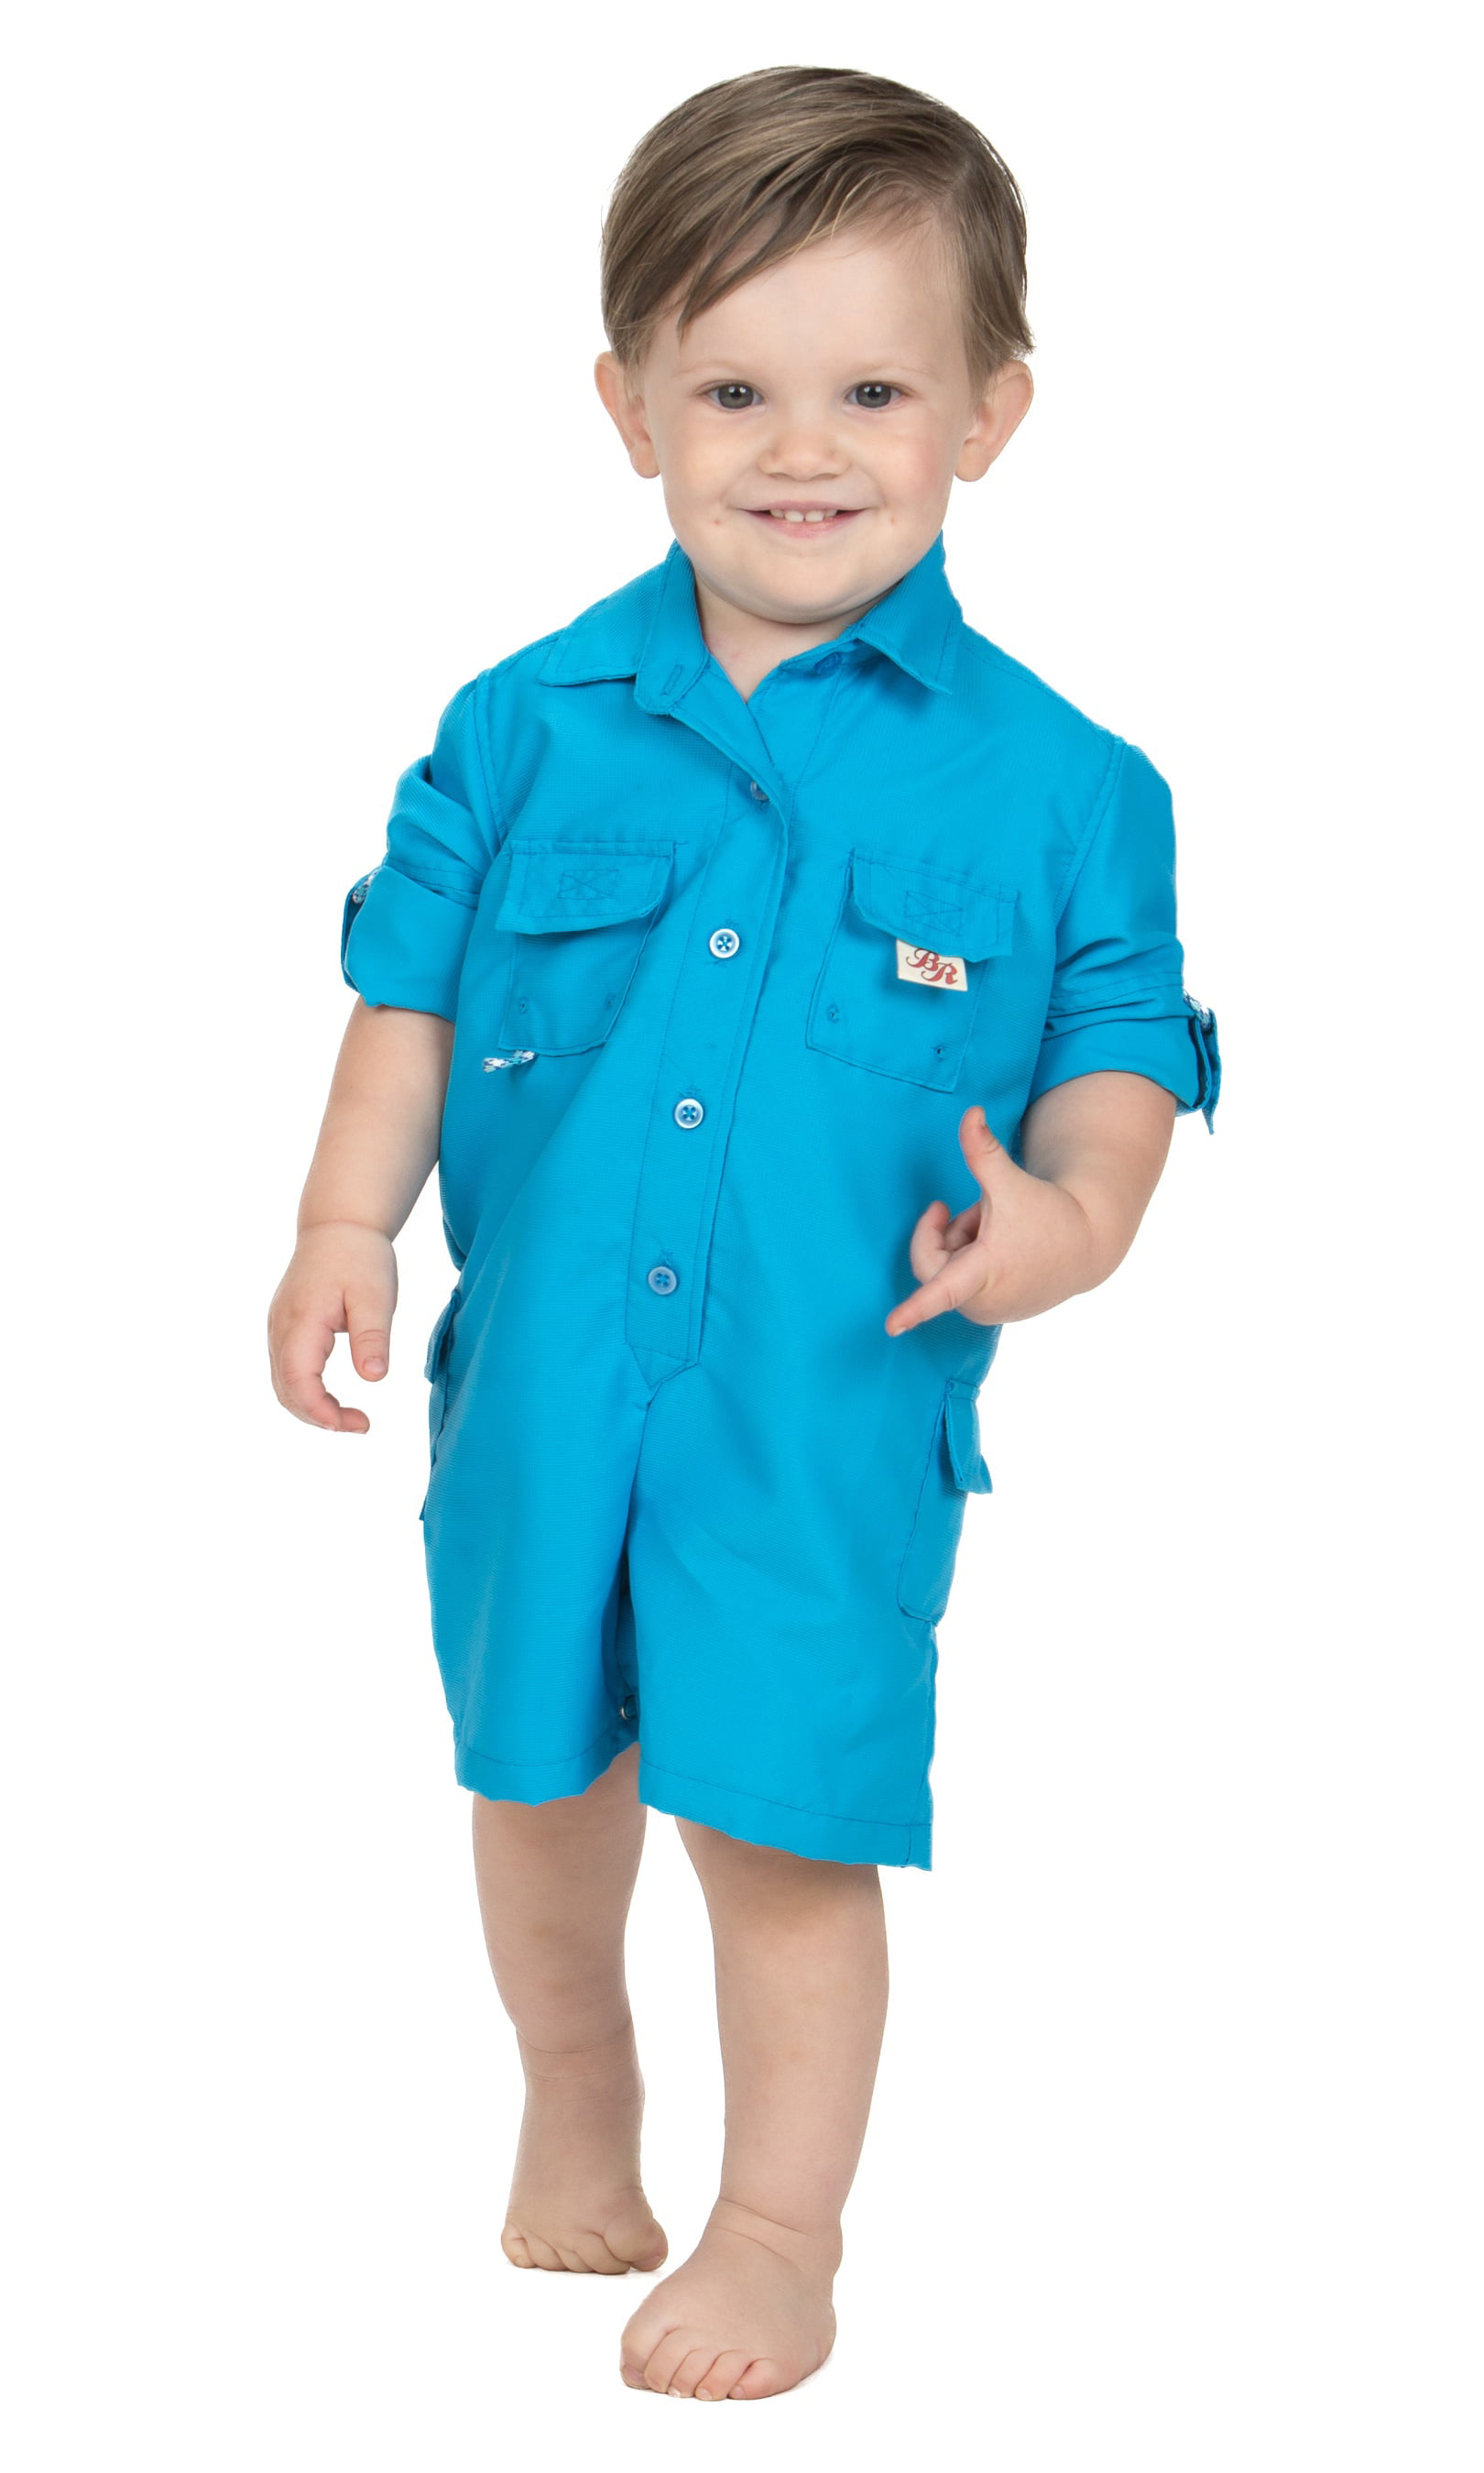 BullRed Baby Vented One Piece Fishing Shortall Romper w/ Snap